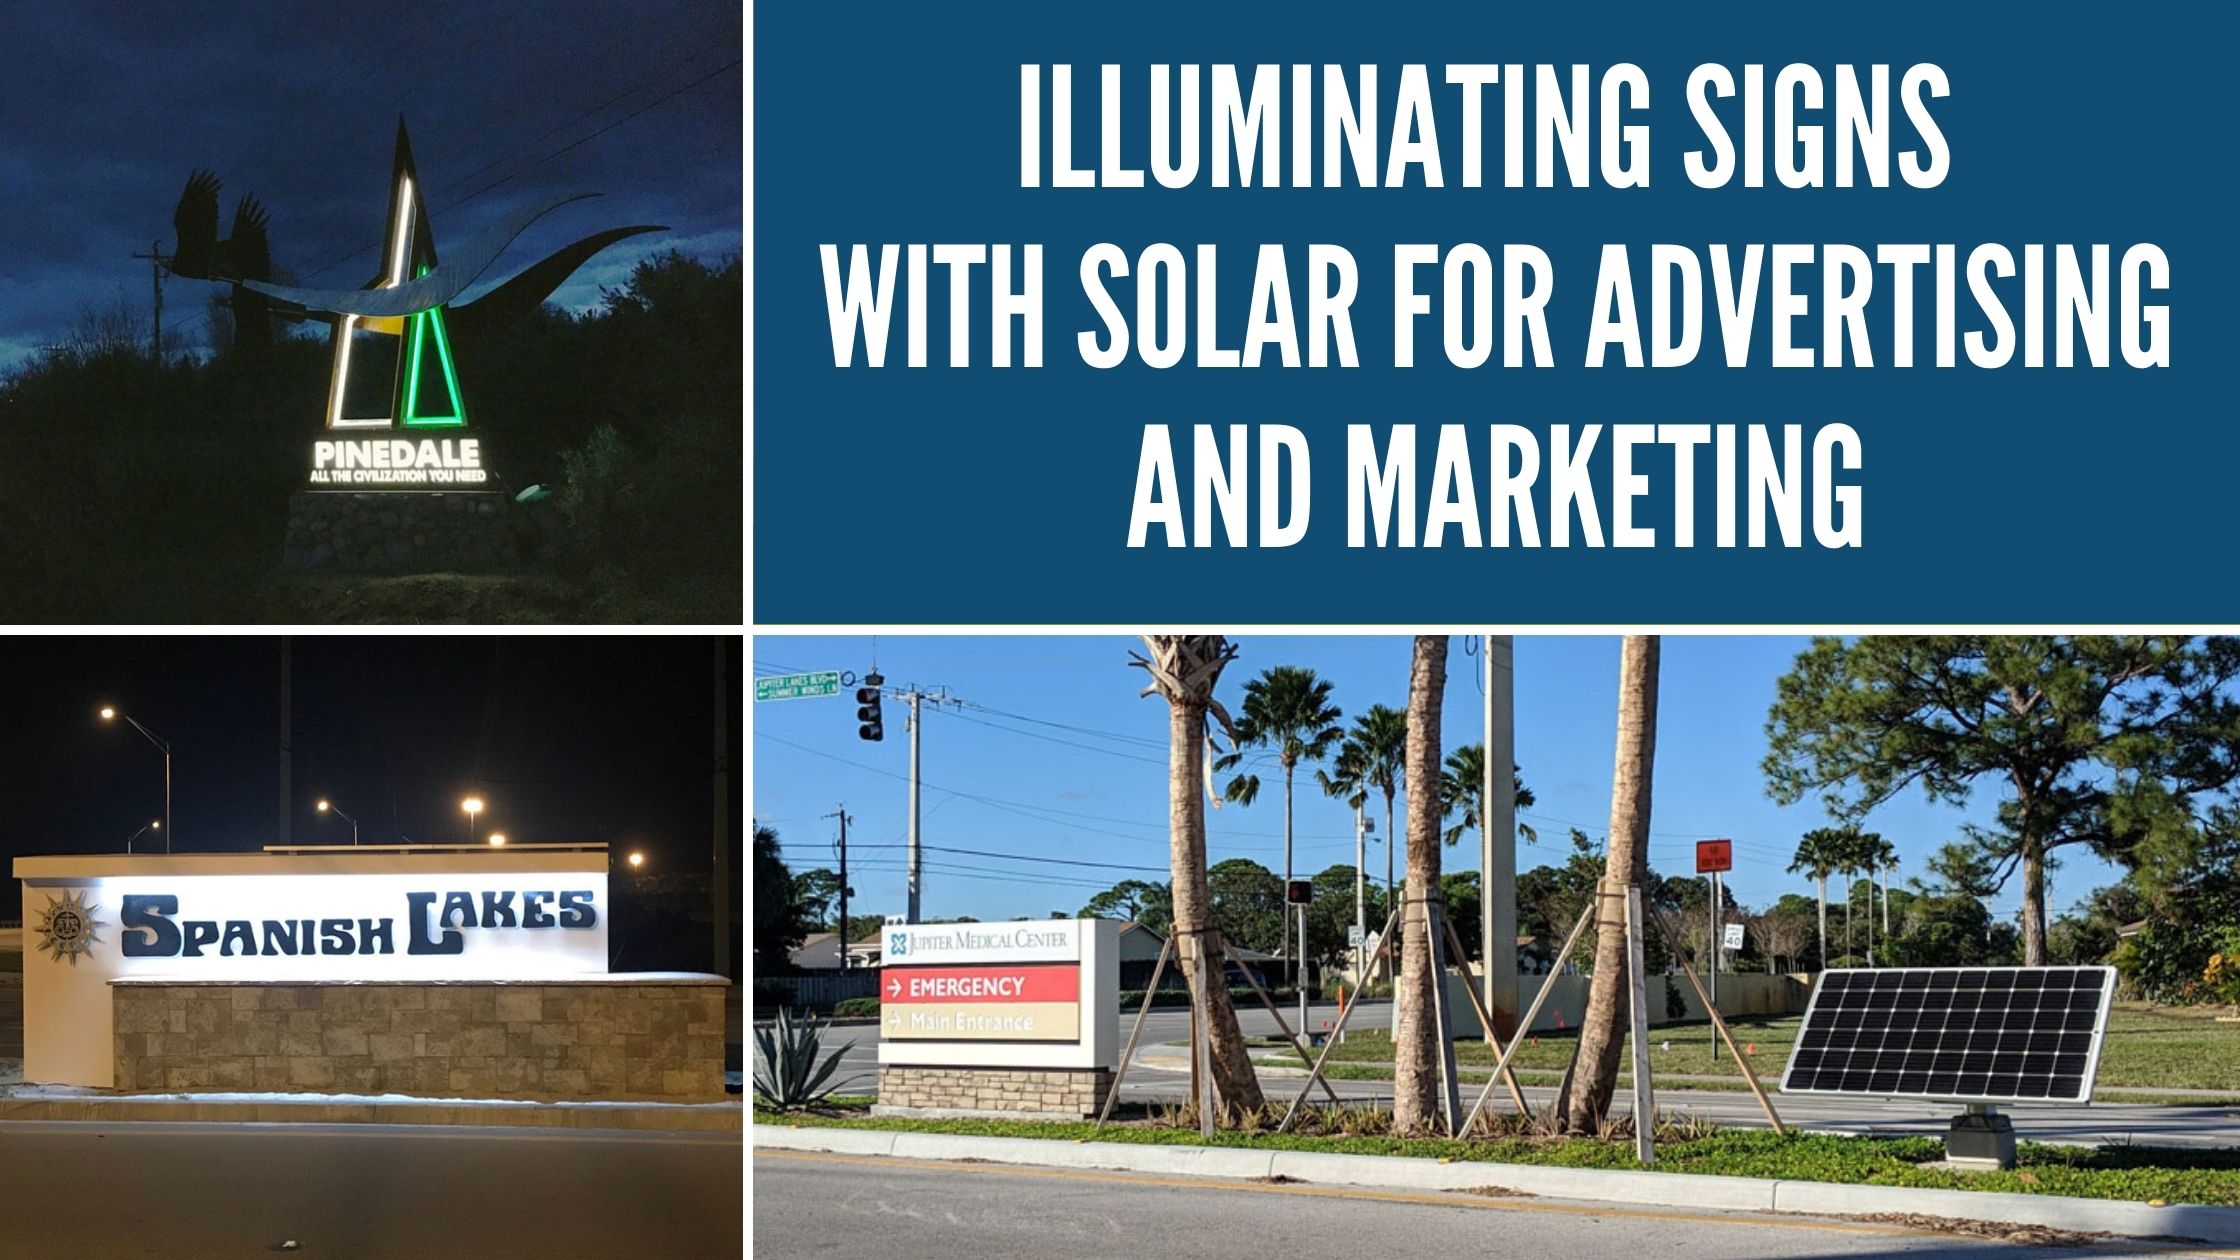 Illuminating Signs with Solar For Advertising And Marketing